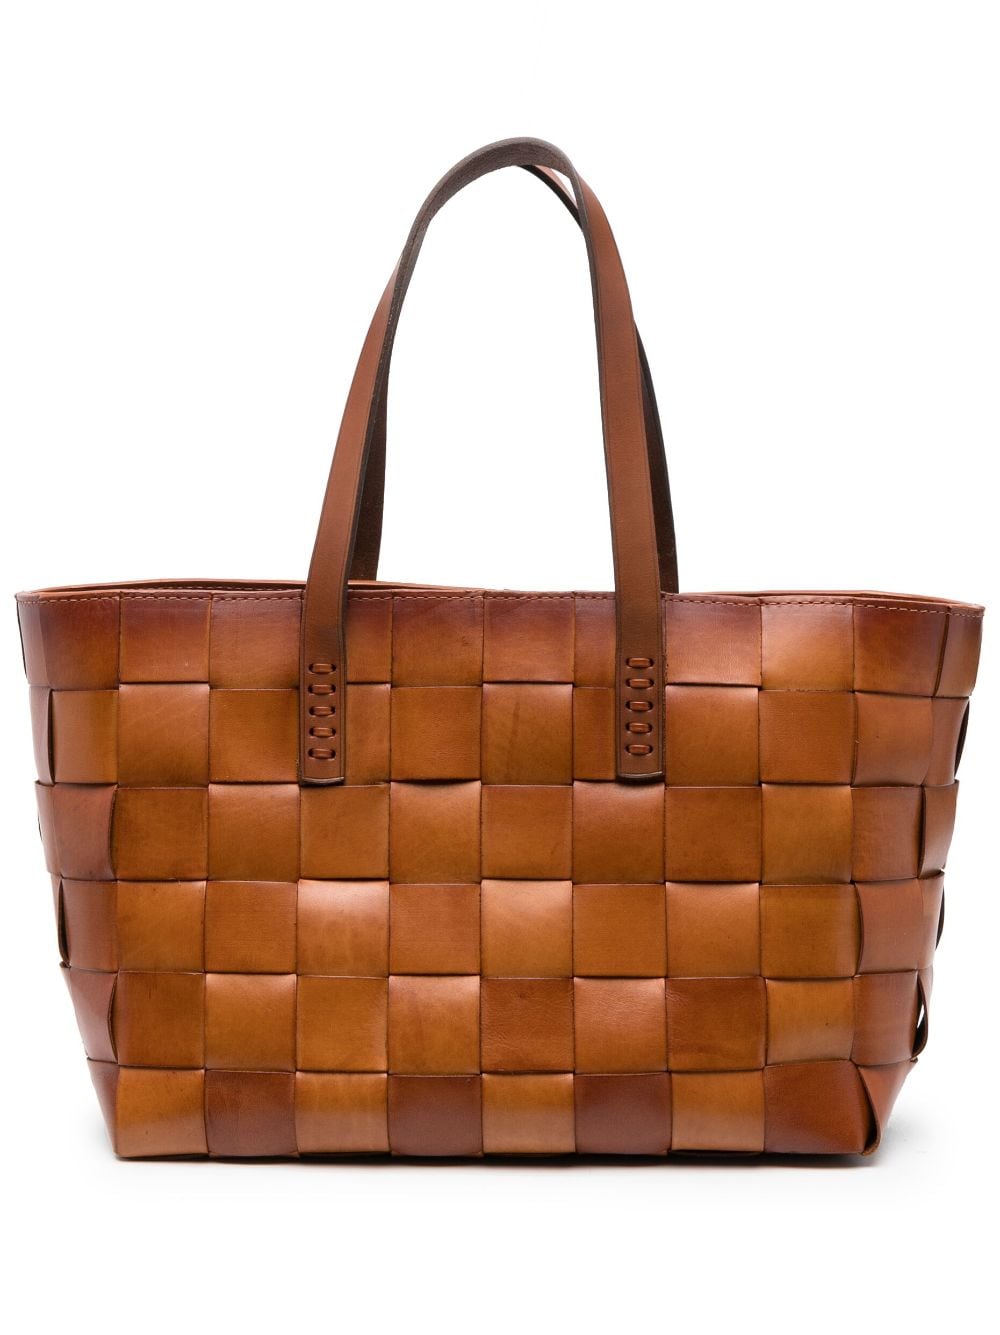 woven leather tote bag